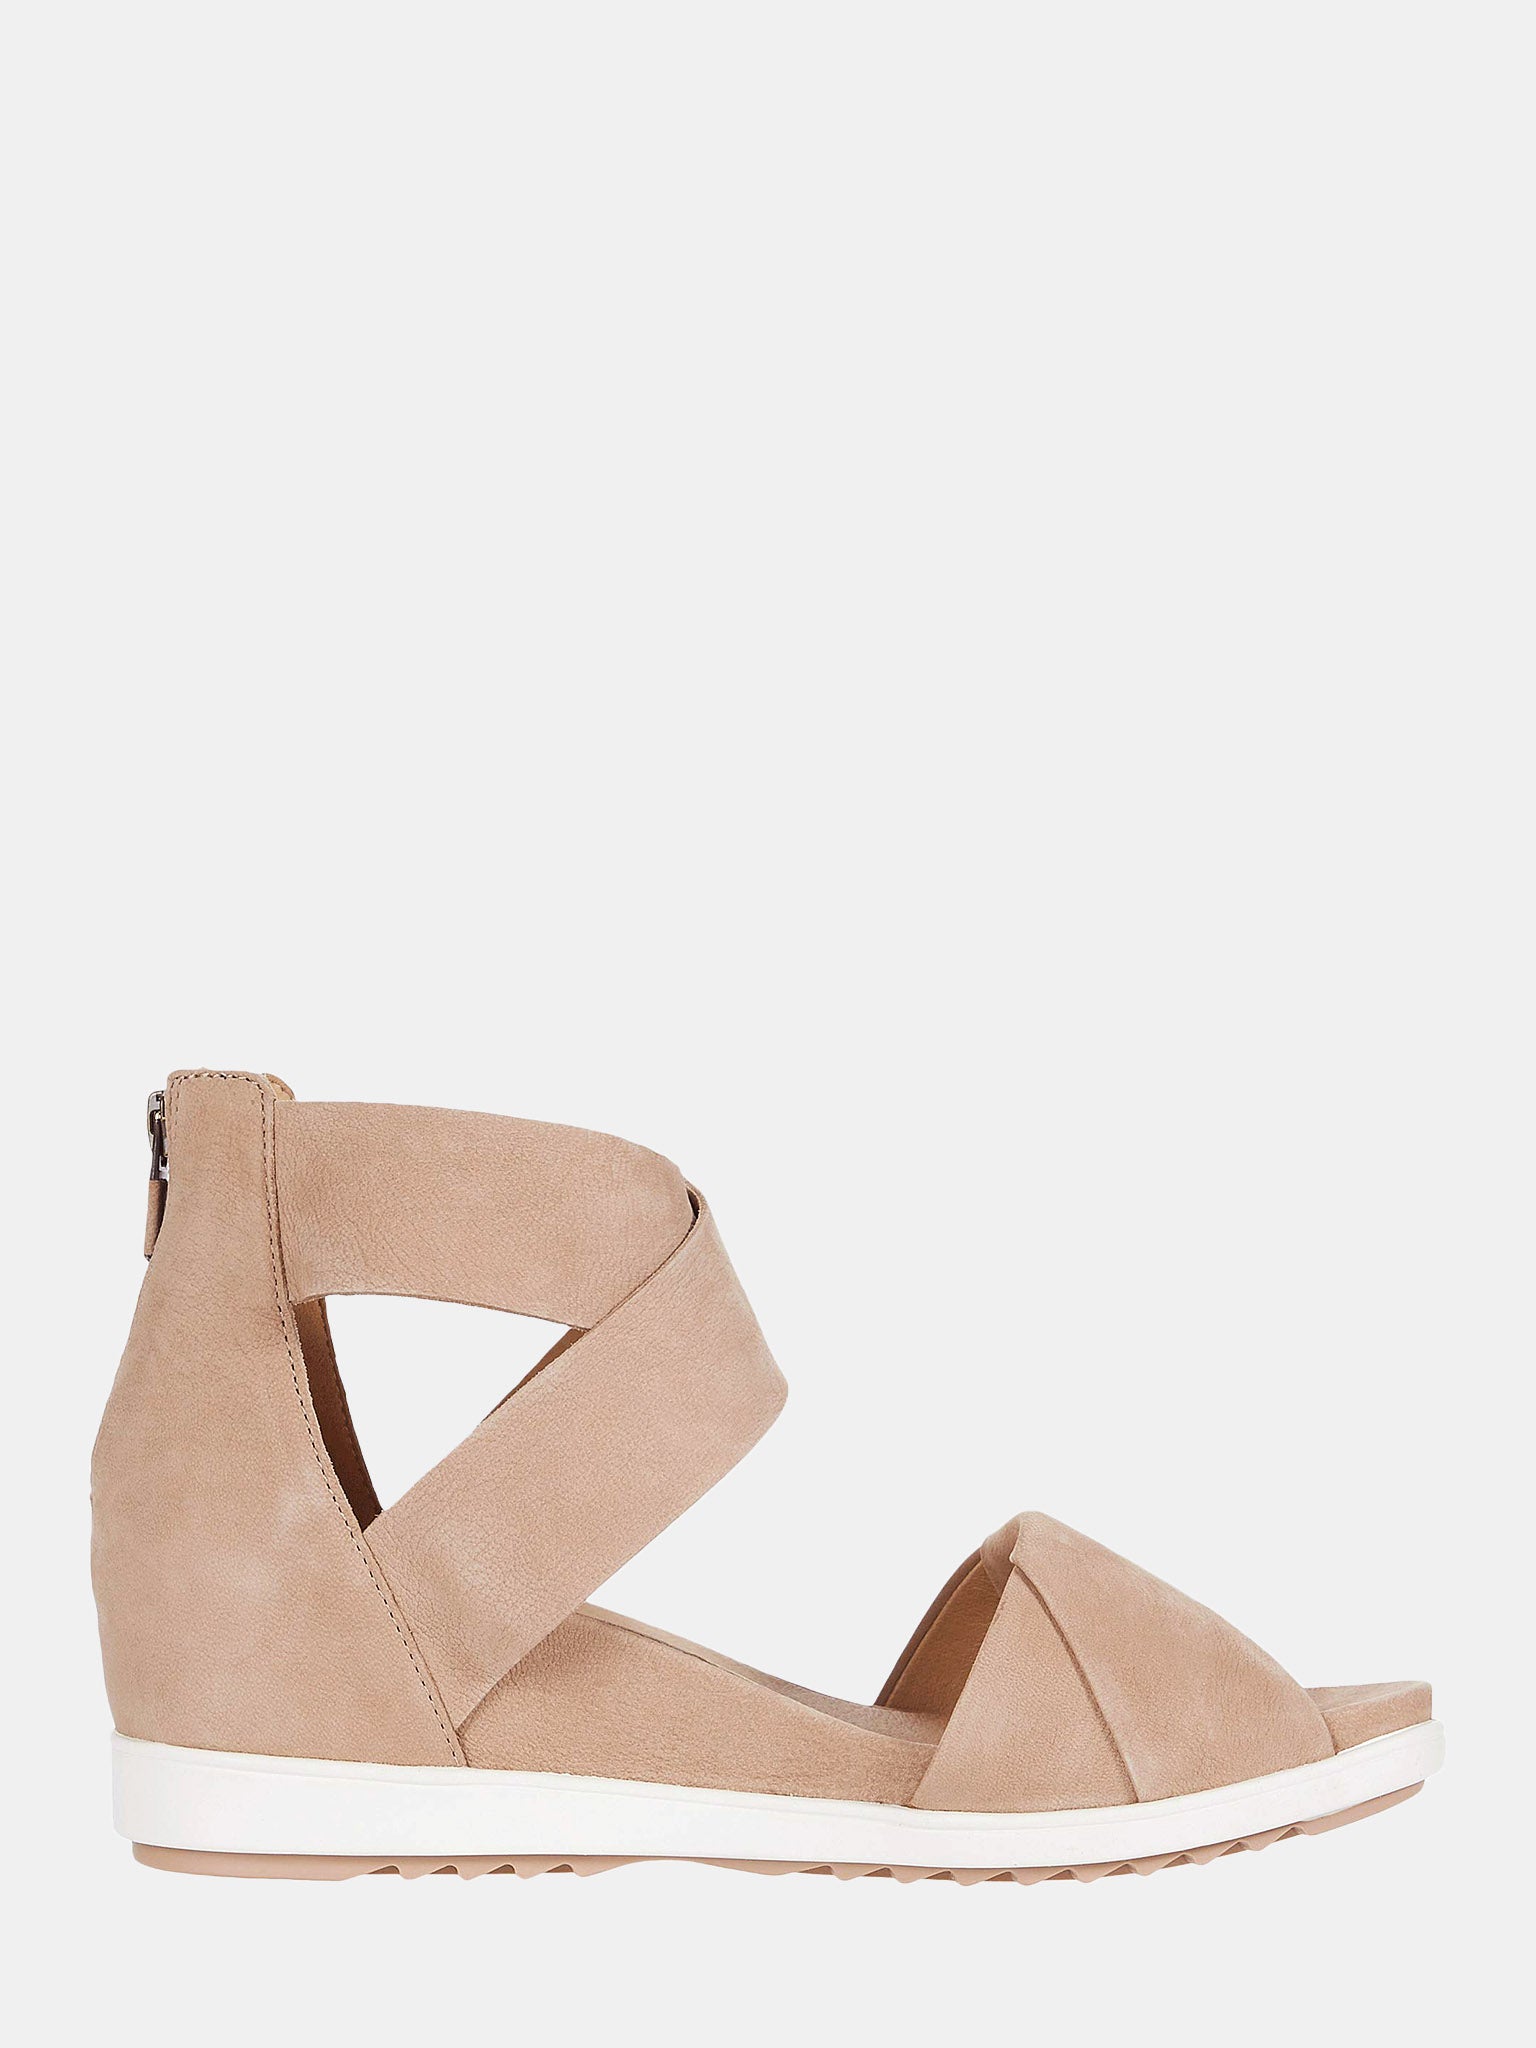 eileen fisher wedge shoes